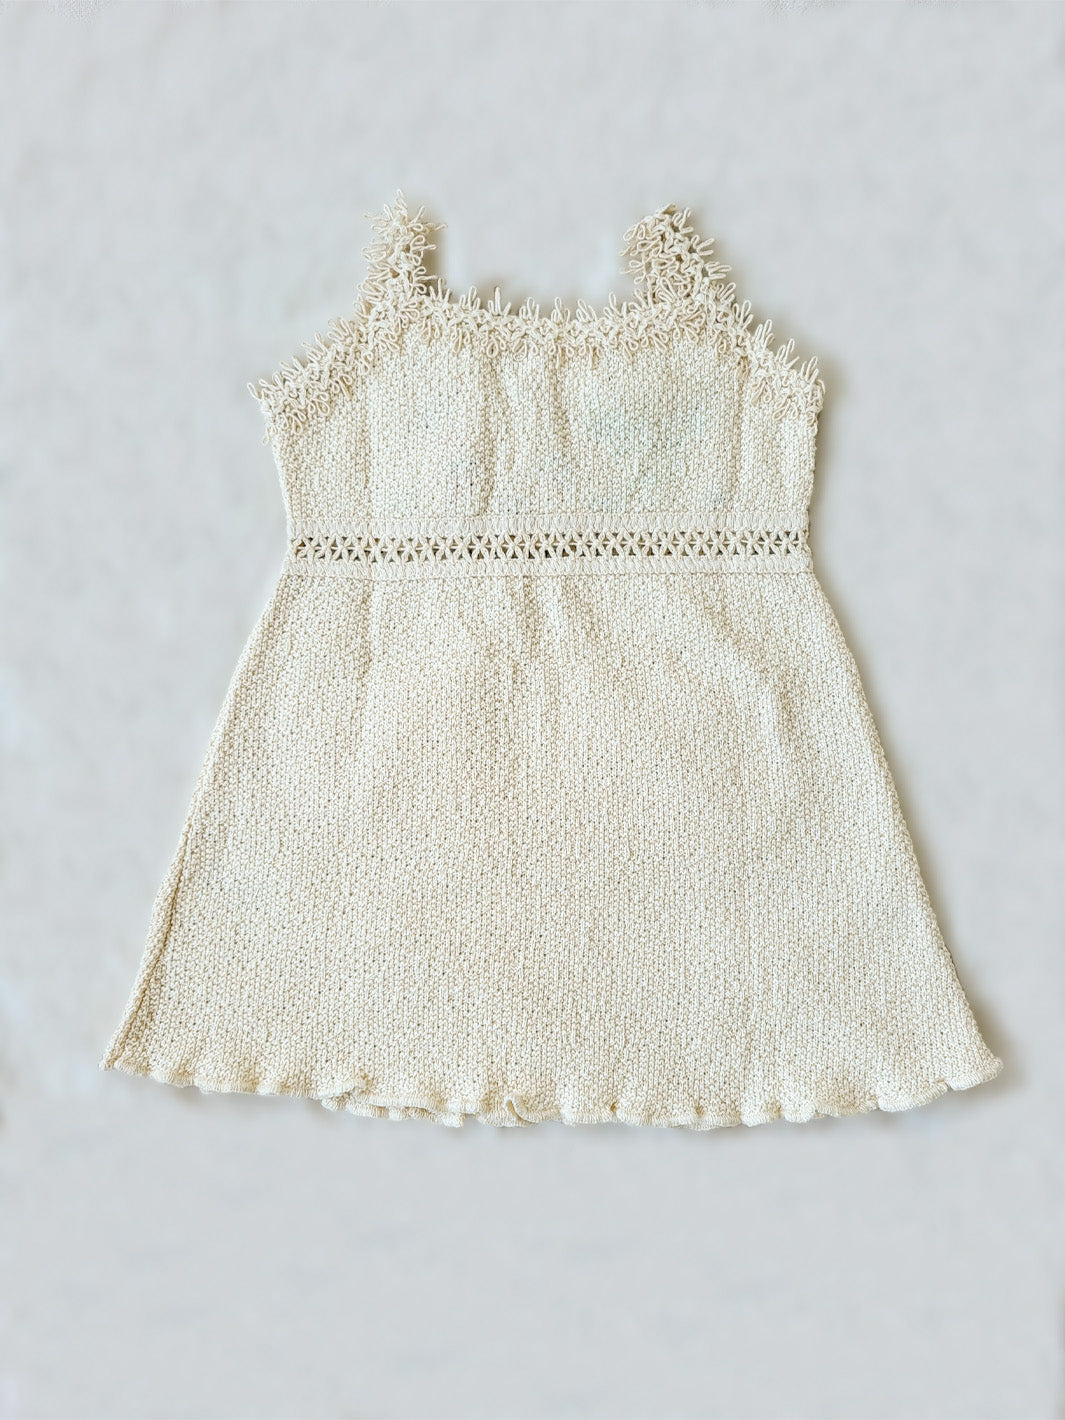 Liten Aventuris Collections. Dress your little star in this Estrella Dress! Featuring a strappy design, two front pockets with intricate cotton knitted lace, and colorful farm animal embroidery, your kiddo will be twinkling bright in no time! With its natural Peruvian Tanguis Cotton and star-inspired name, this dress will make your kids feel like they have the universe in their pocket! Ethically made in Peru. Ekologisk klänning för flickor och bebisar.